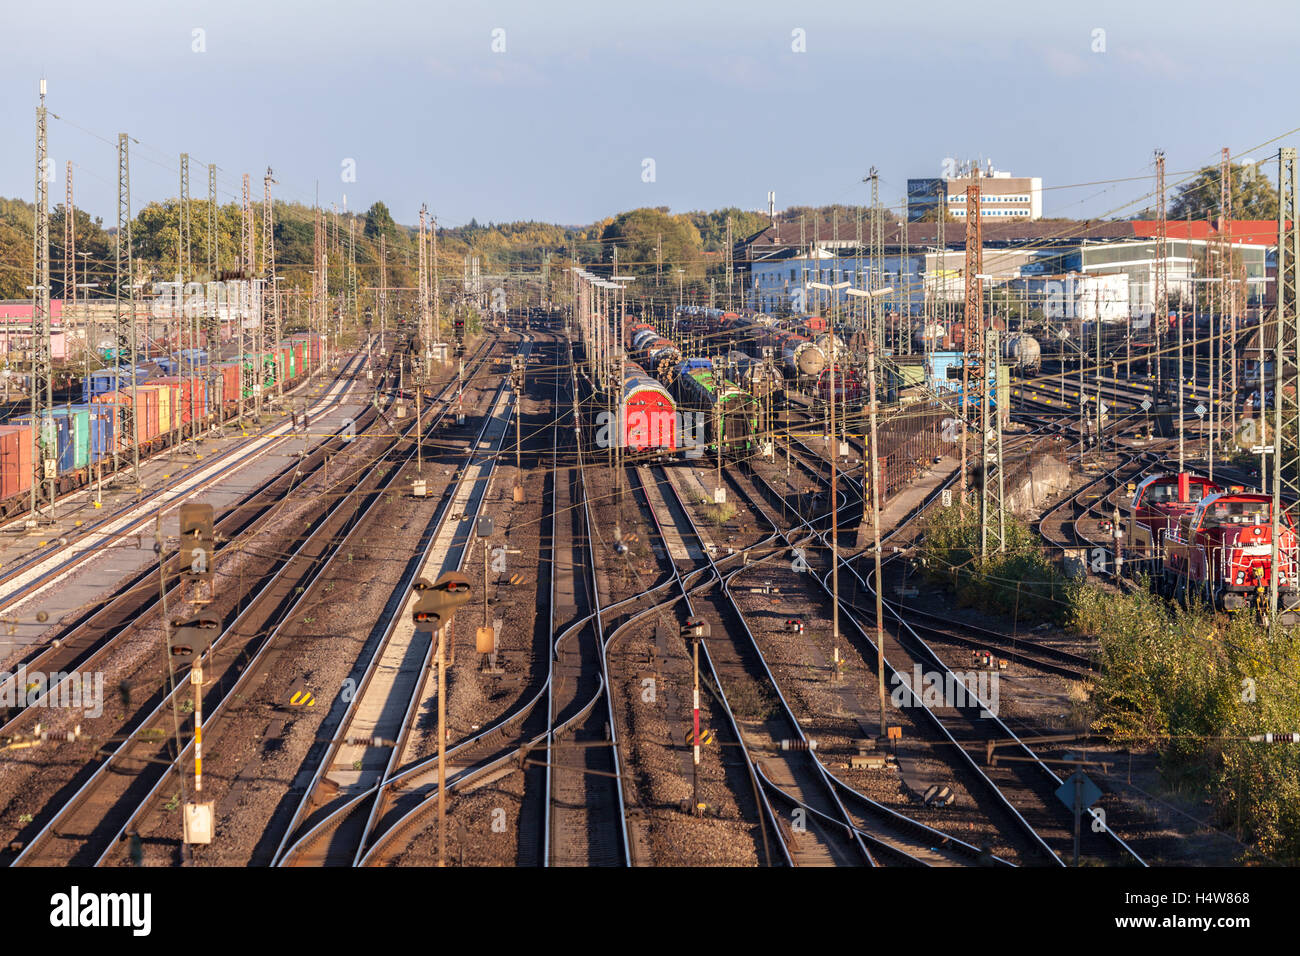 HANNOVER / GERMANY - OCTOBER 16, 2016: freight trains stands on the freight yard hannover / germany at october 16, 2016 Stock Photo